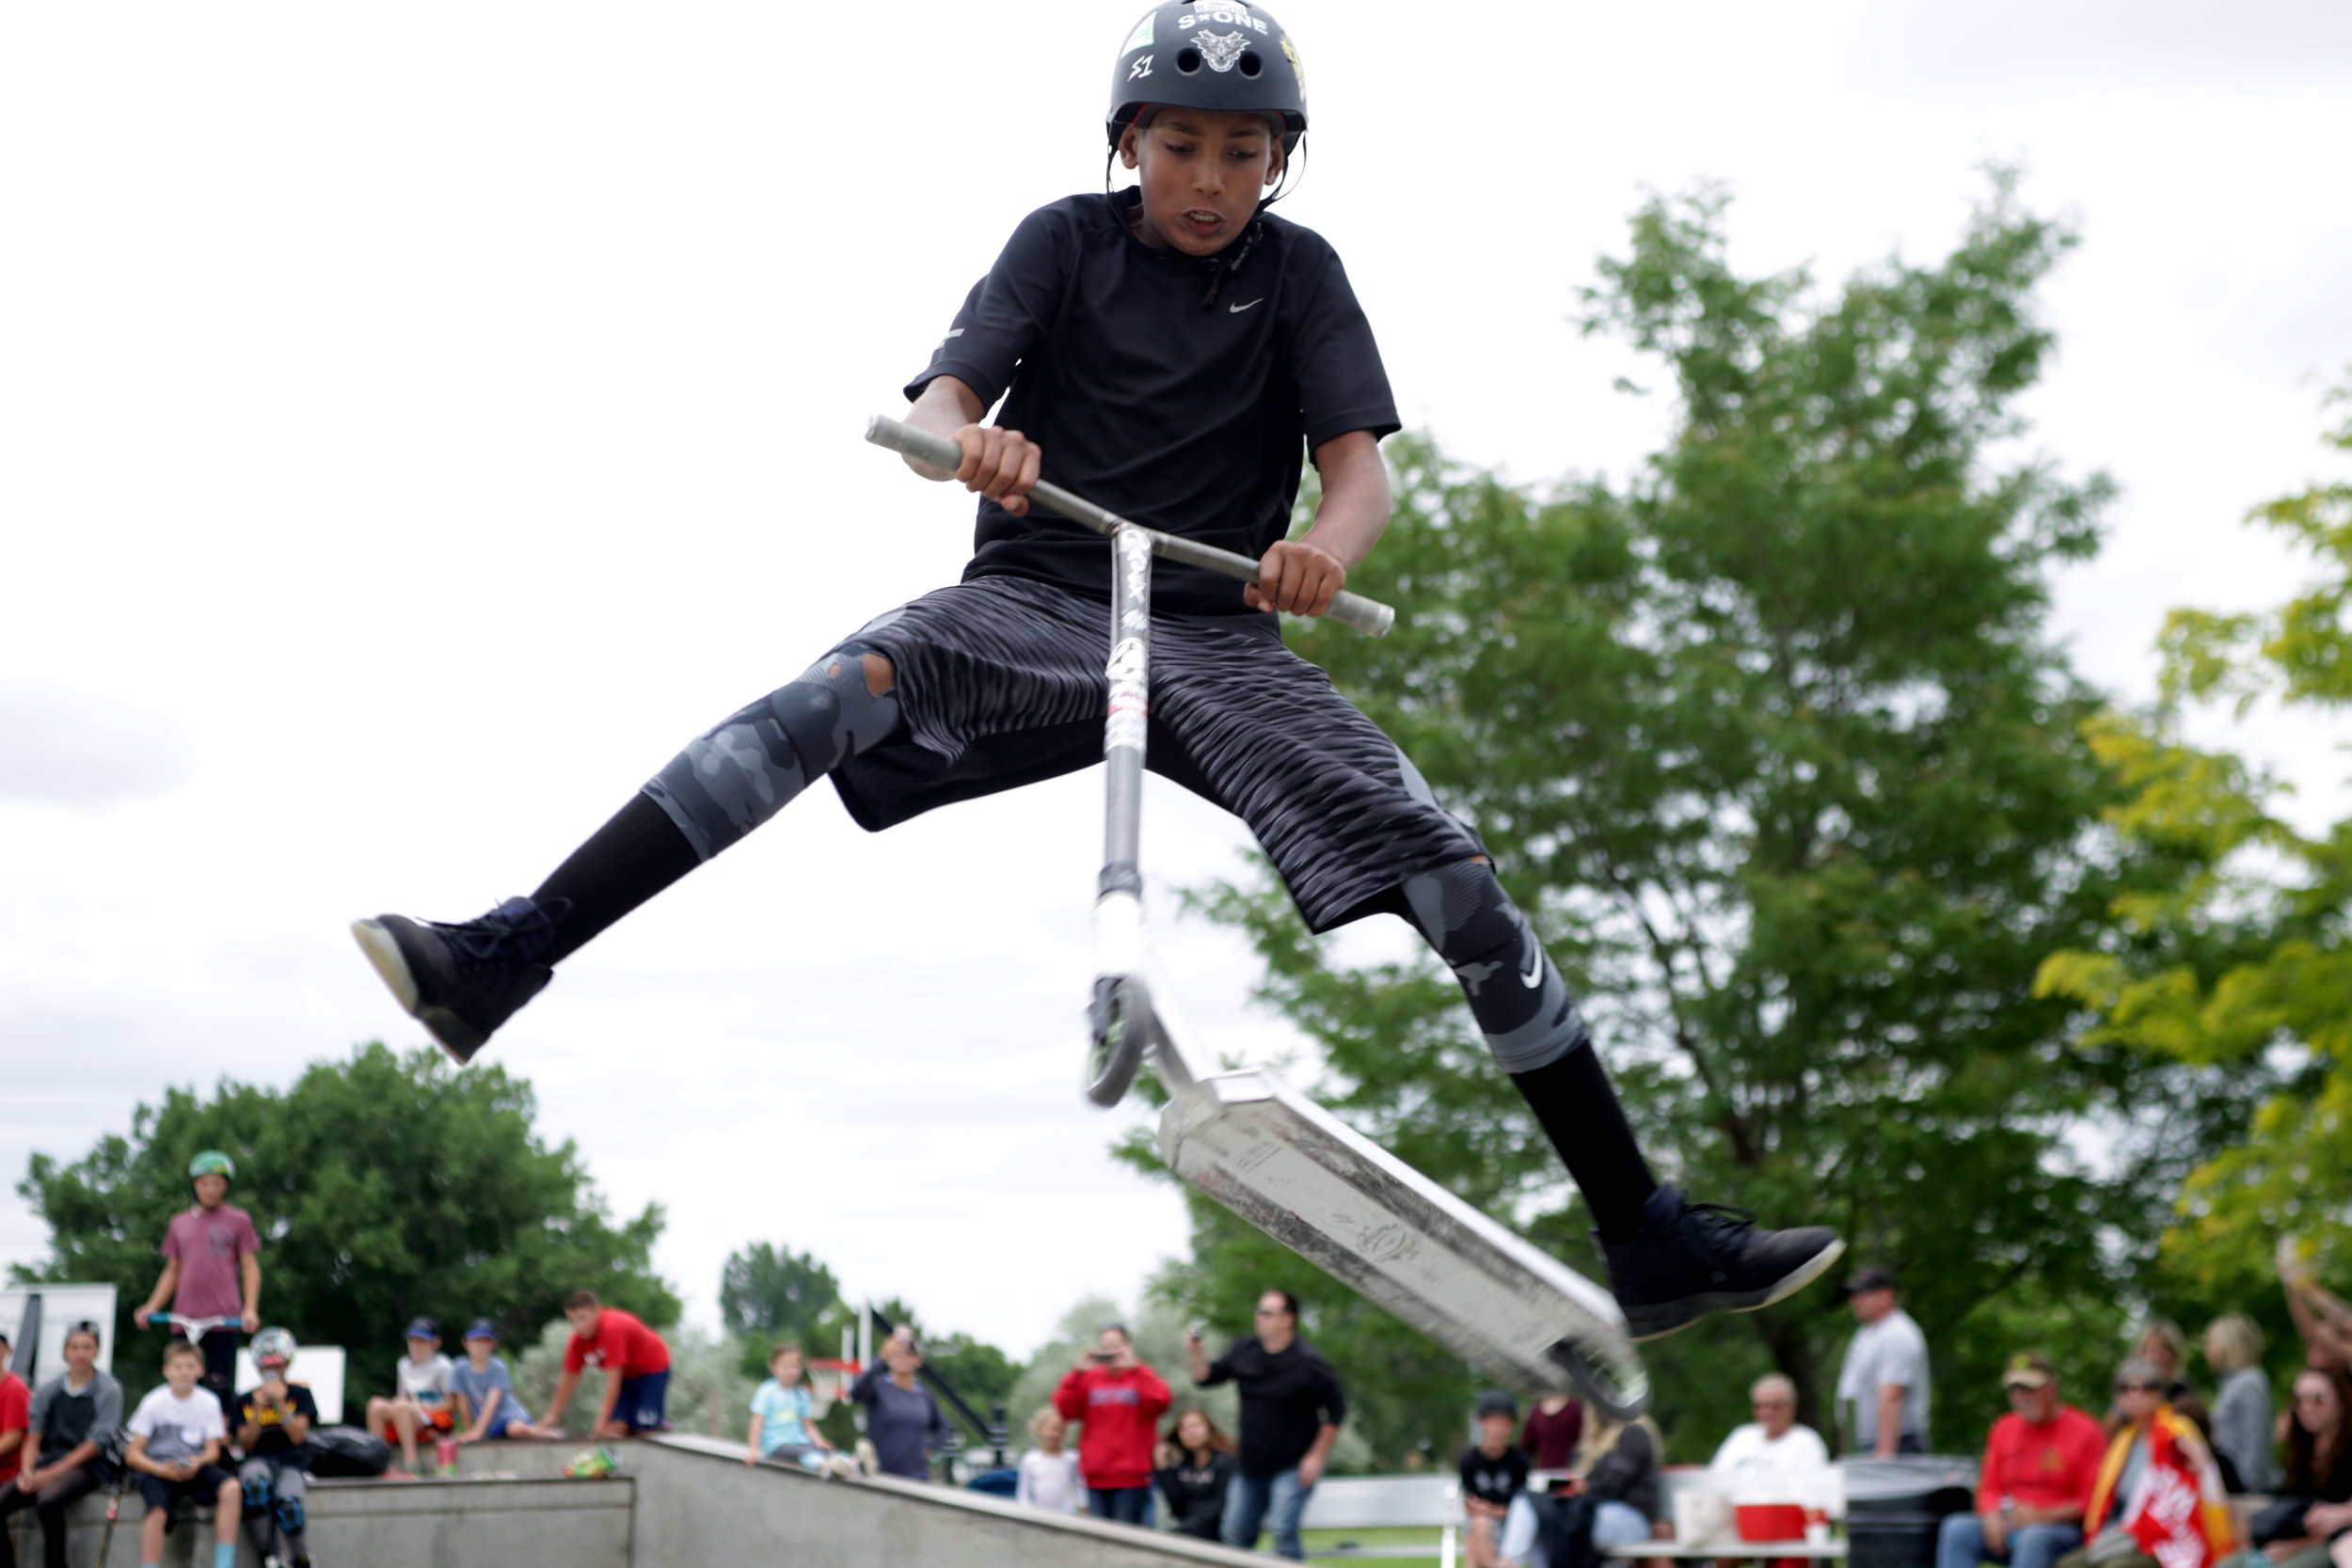  Terrick Wilkins 13, jumps over the ledge of a bowl at the Windsor, Colorado, Grind scooter and skateboarding competition, June 2017. The Windsor Grind was a joint effort put together by the Windsor Clearview Library District and Windsor Parks Recrea